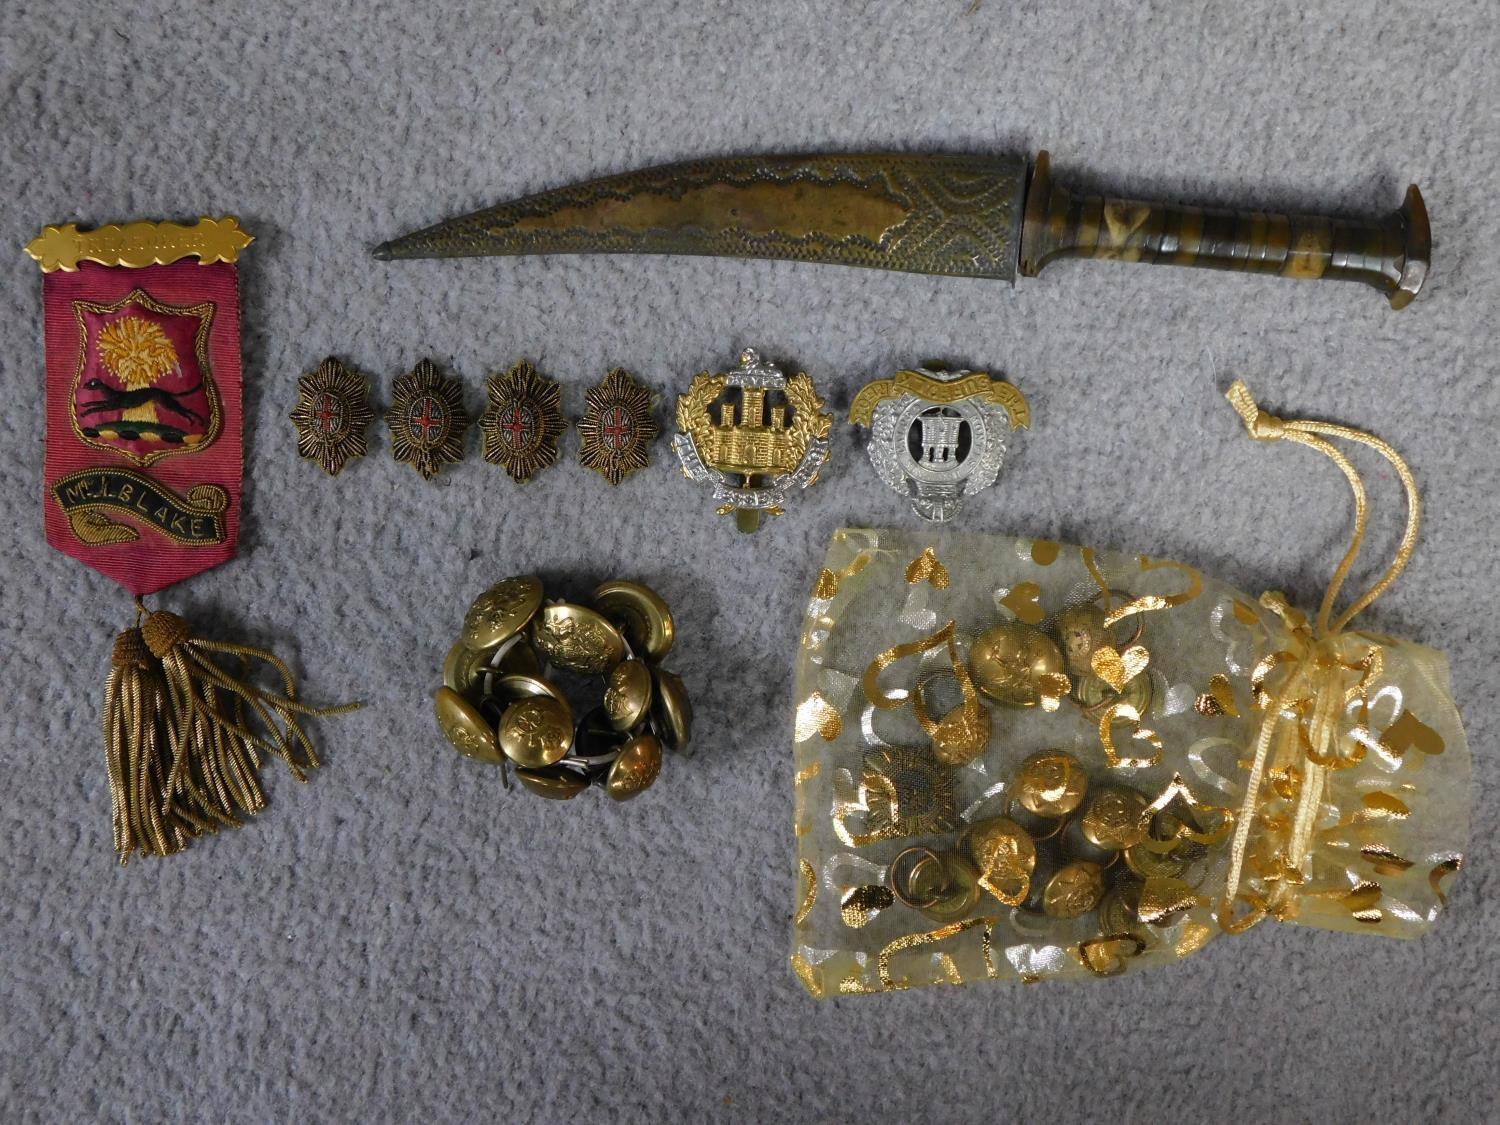 A collection of military regalia and brass buttons along with a bone handled dagger with hammered